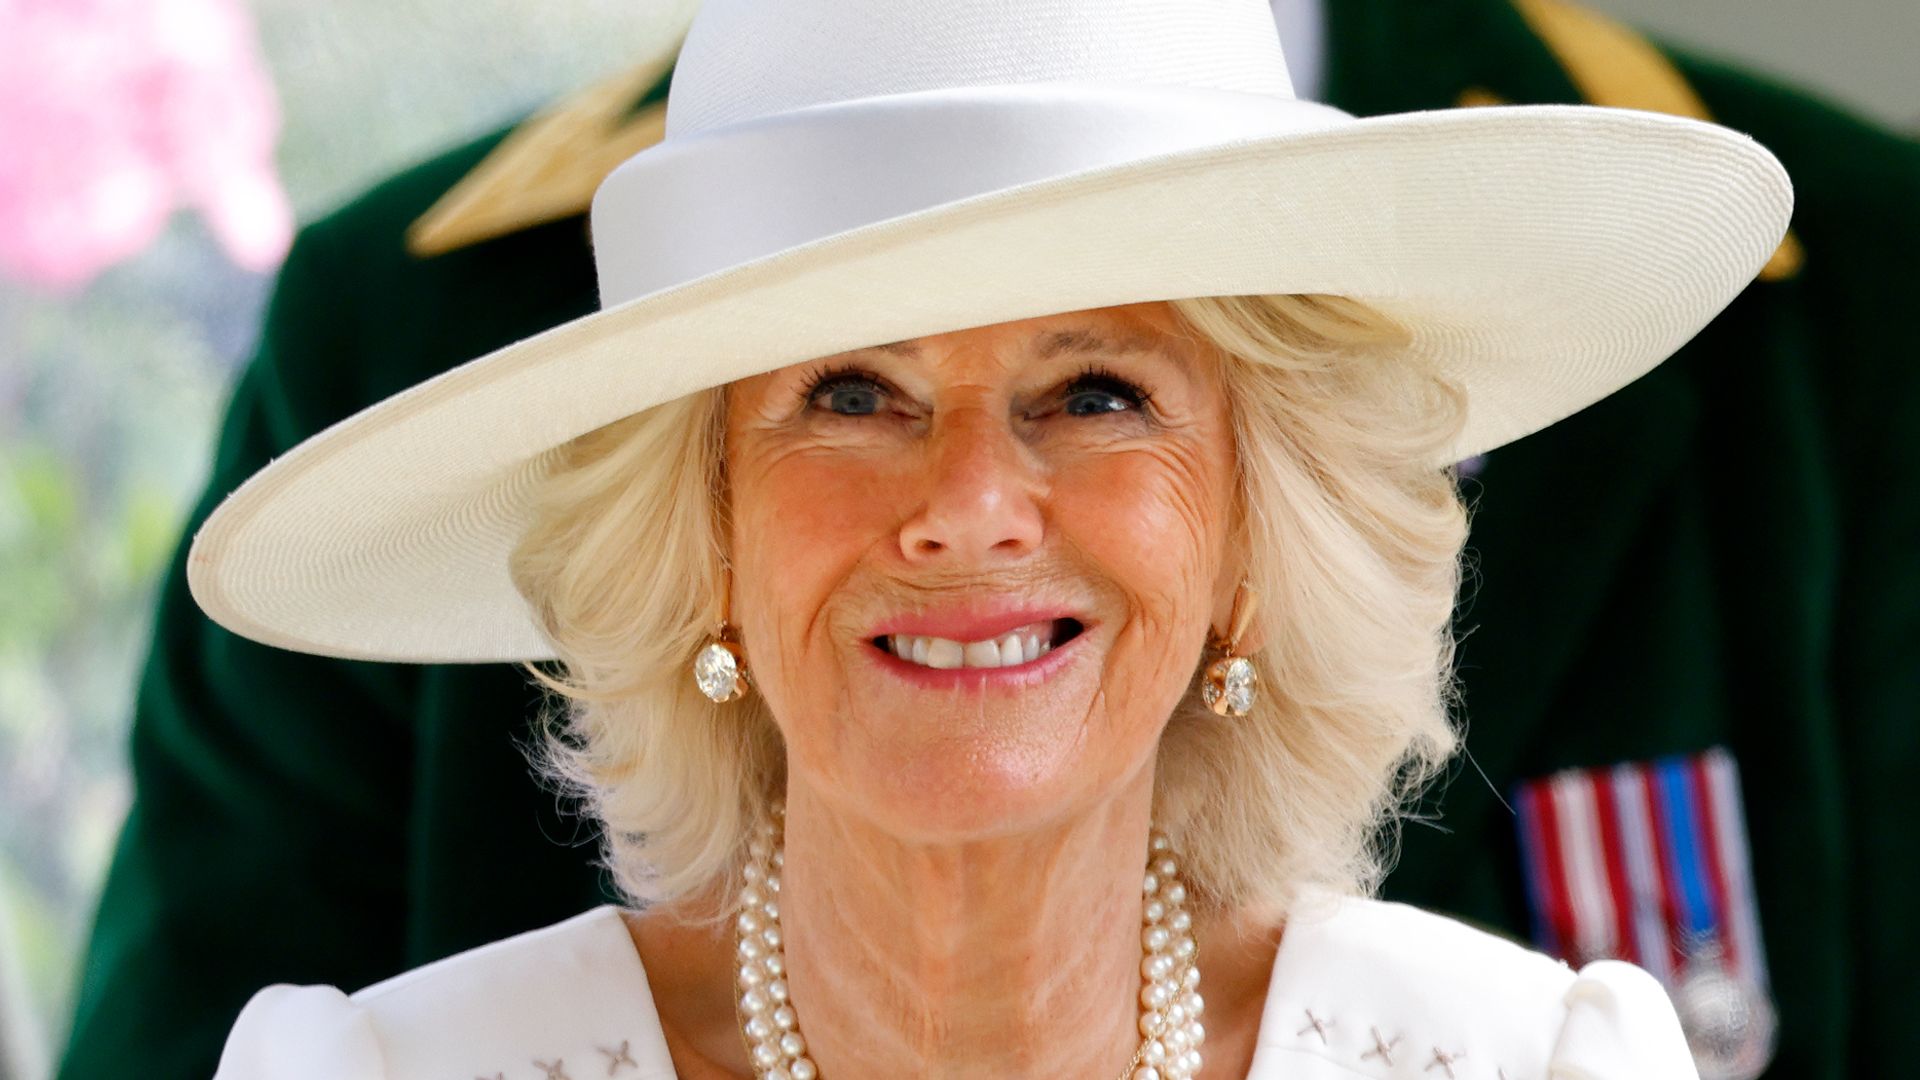 Camilla, Duchess of Cornwall attends day 2 of Royal Ascot at Ascot Racecourse on June 15, 2022 in Ascot, England.